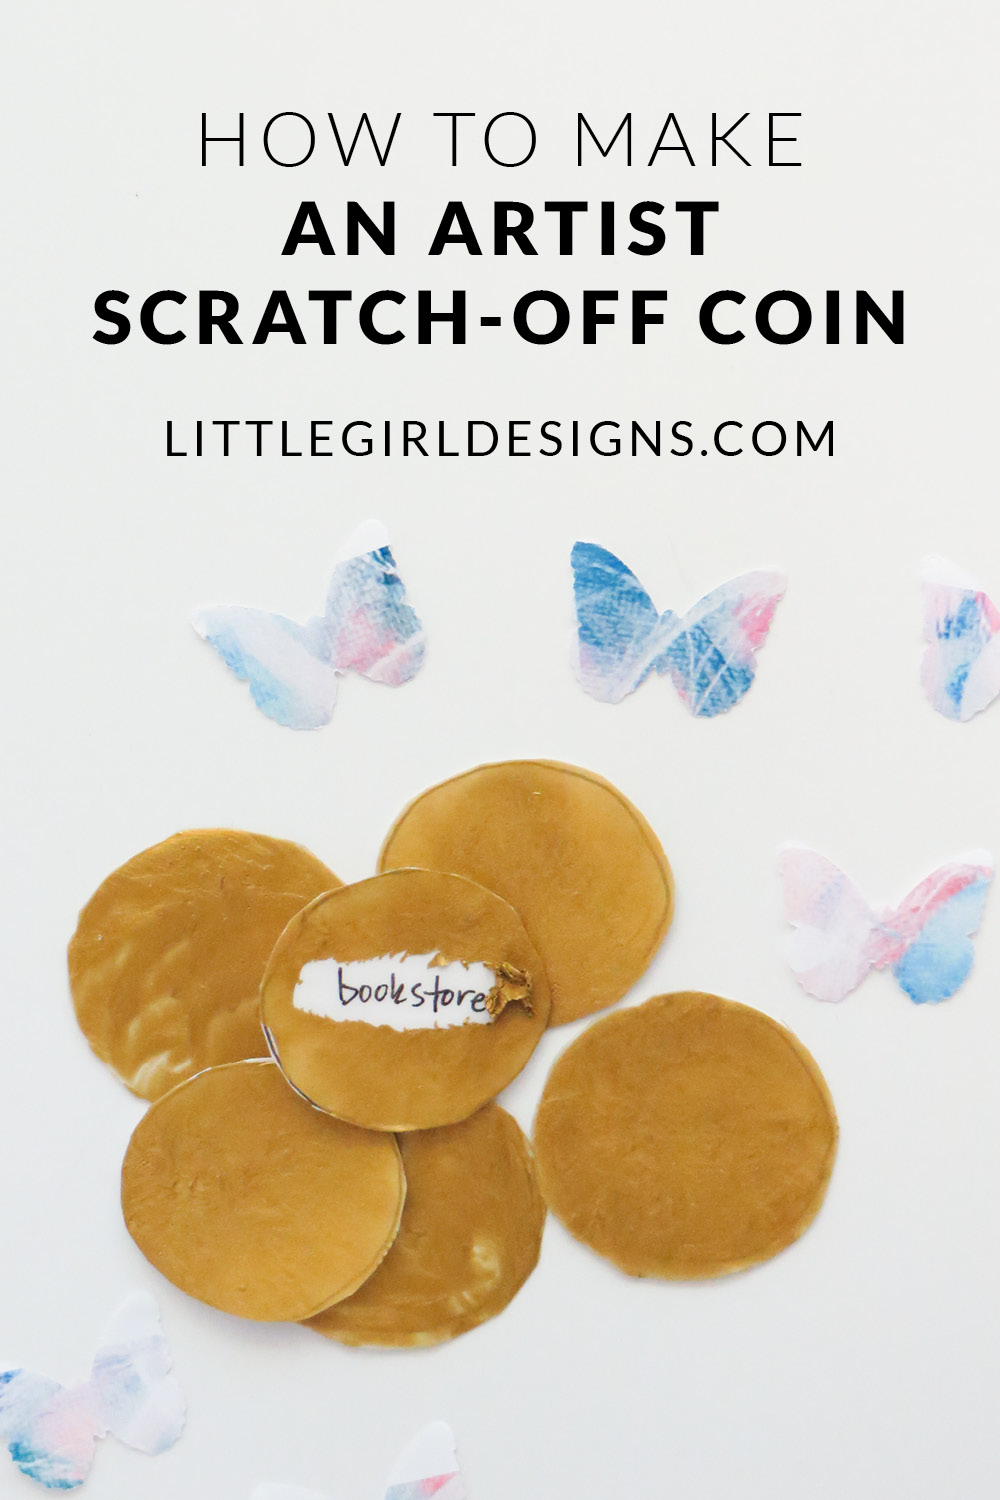 How to Make an Artist Scratch-off Coin - Have you ever wondered how to make your own scratch-off coins? The recipe is so easy! (You probably already have the ingredients.) Make a bunch of these to bring life, adventure, and FUN into your creative practice. These would also make a great gift for your creative friends!